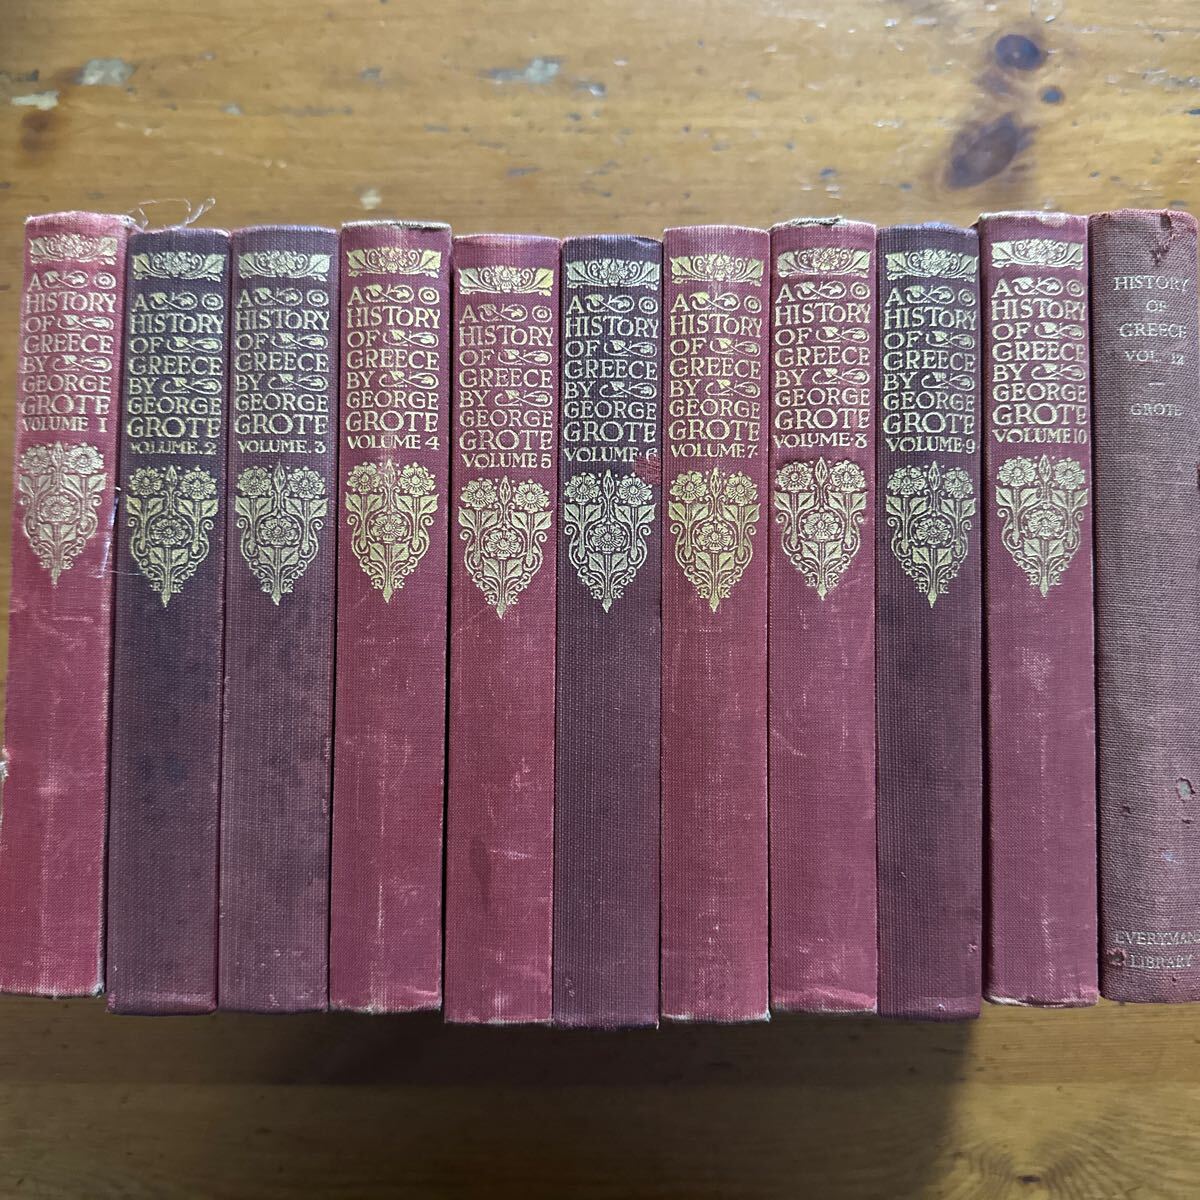 4261 foreign book HISTORY OF GREECE 1-10/12 volume GEORGE GROTE Greece. history EVERYMAN LIBRARY